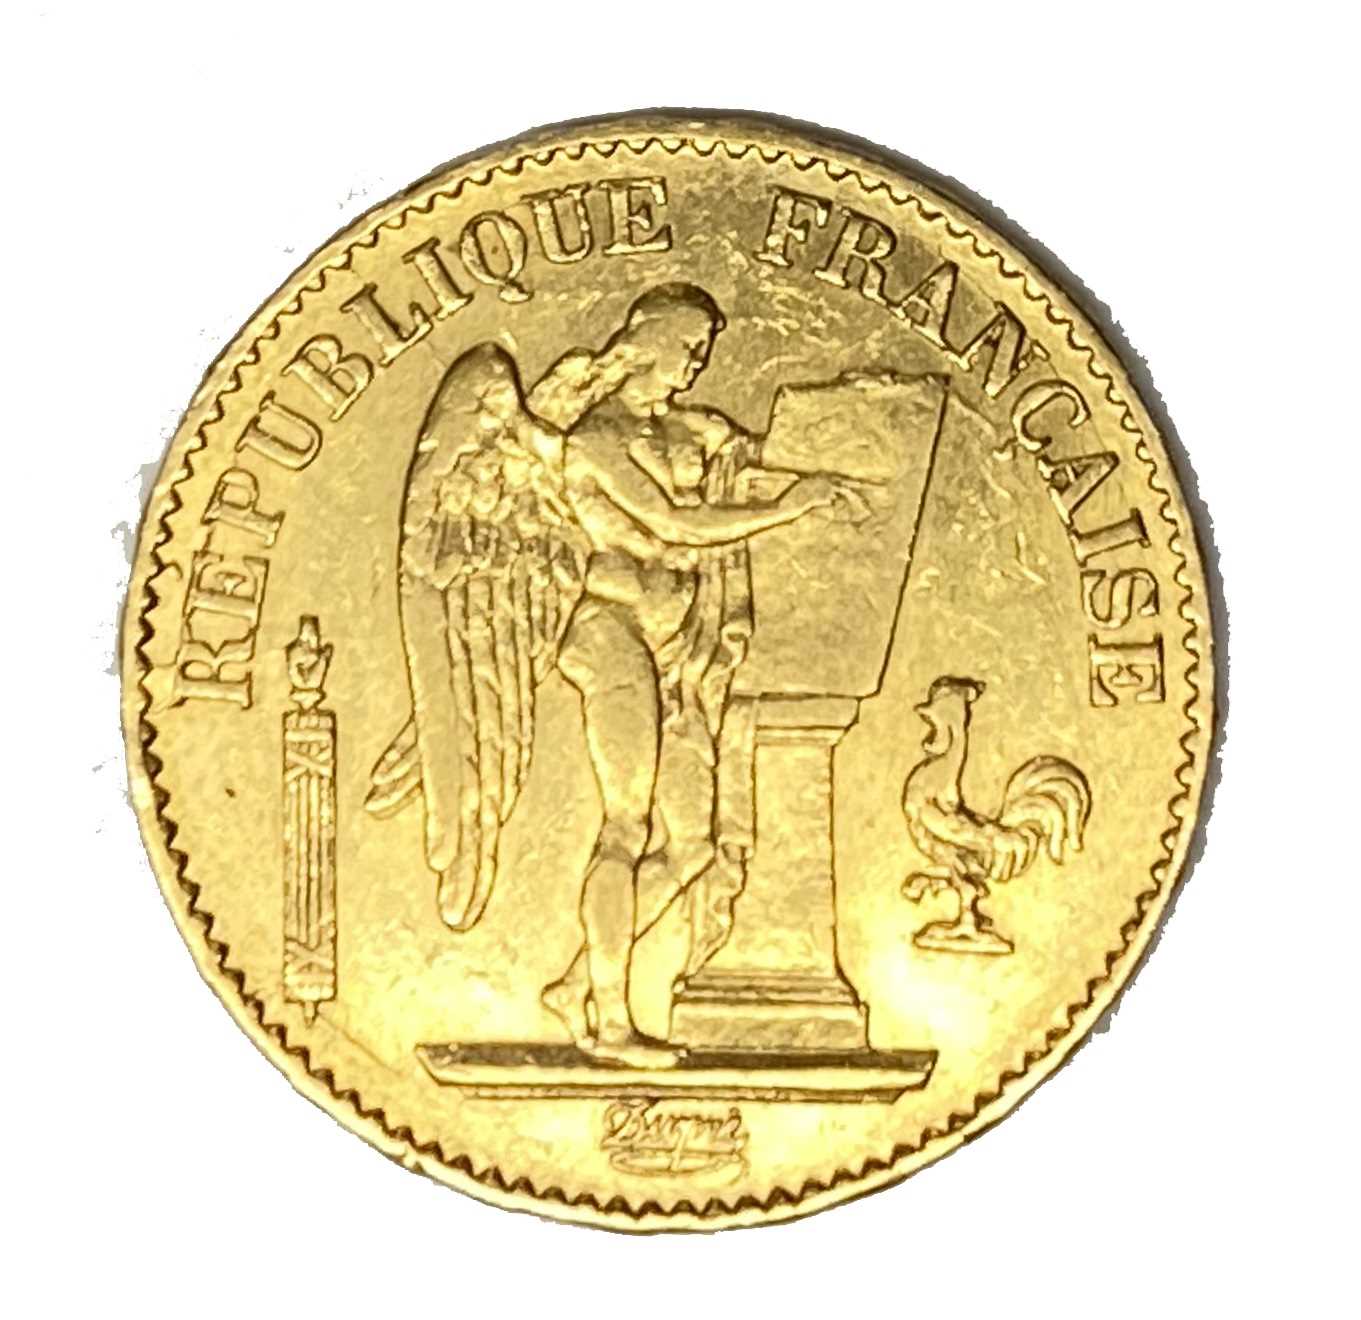 Lot 119 - French Republic 20 Franc gold coin, 1876